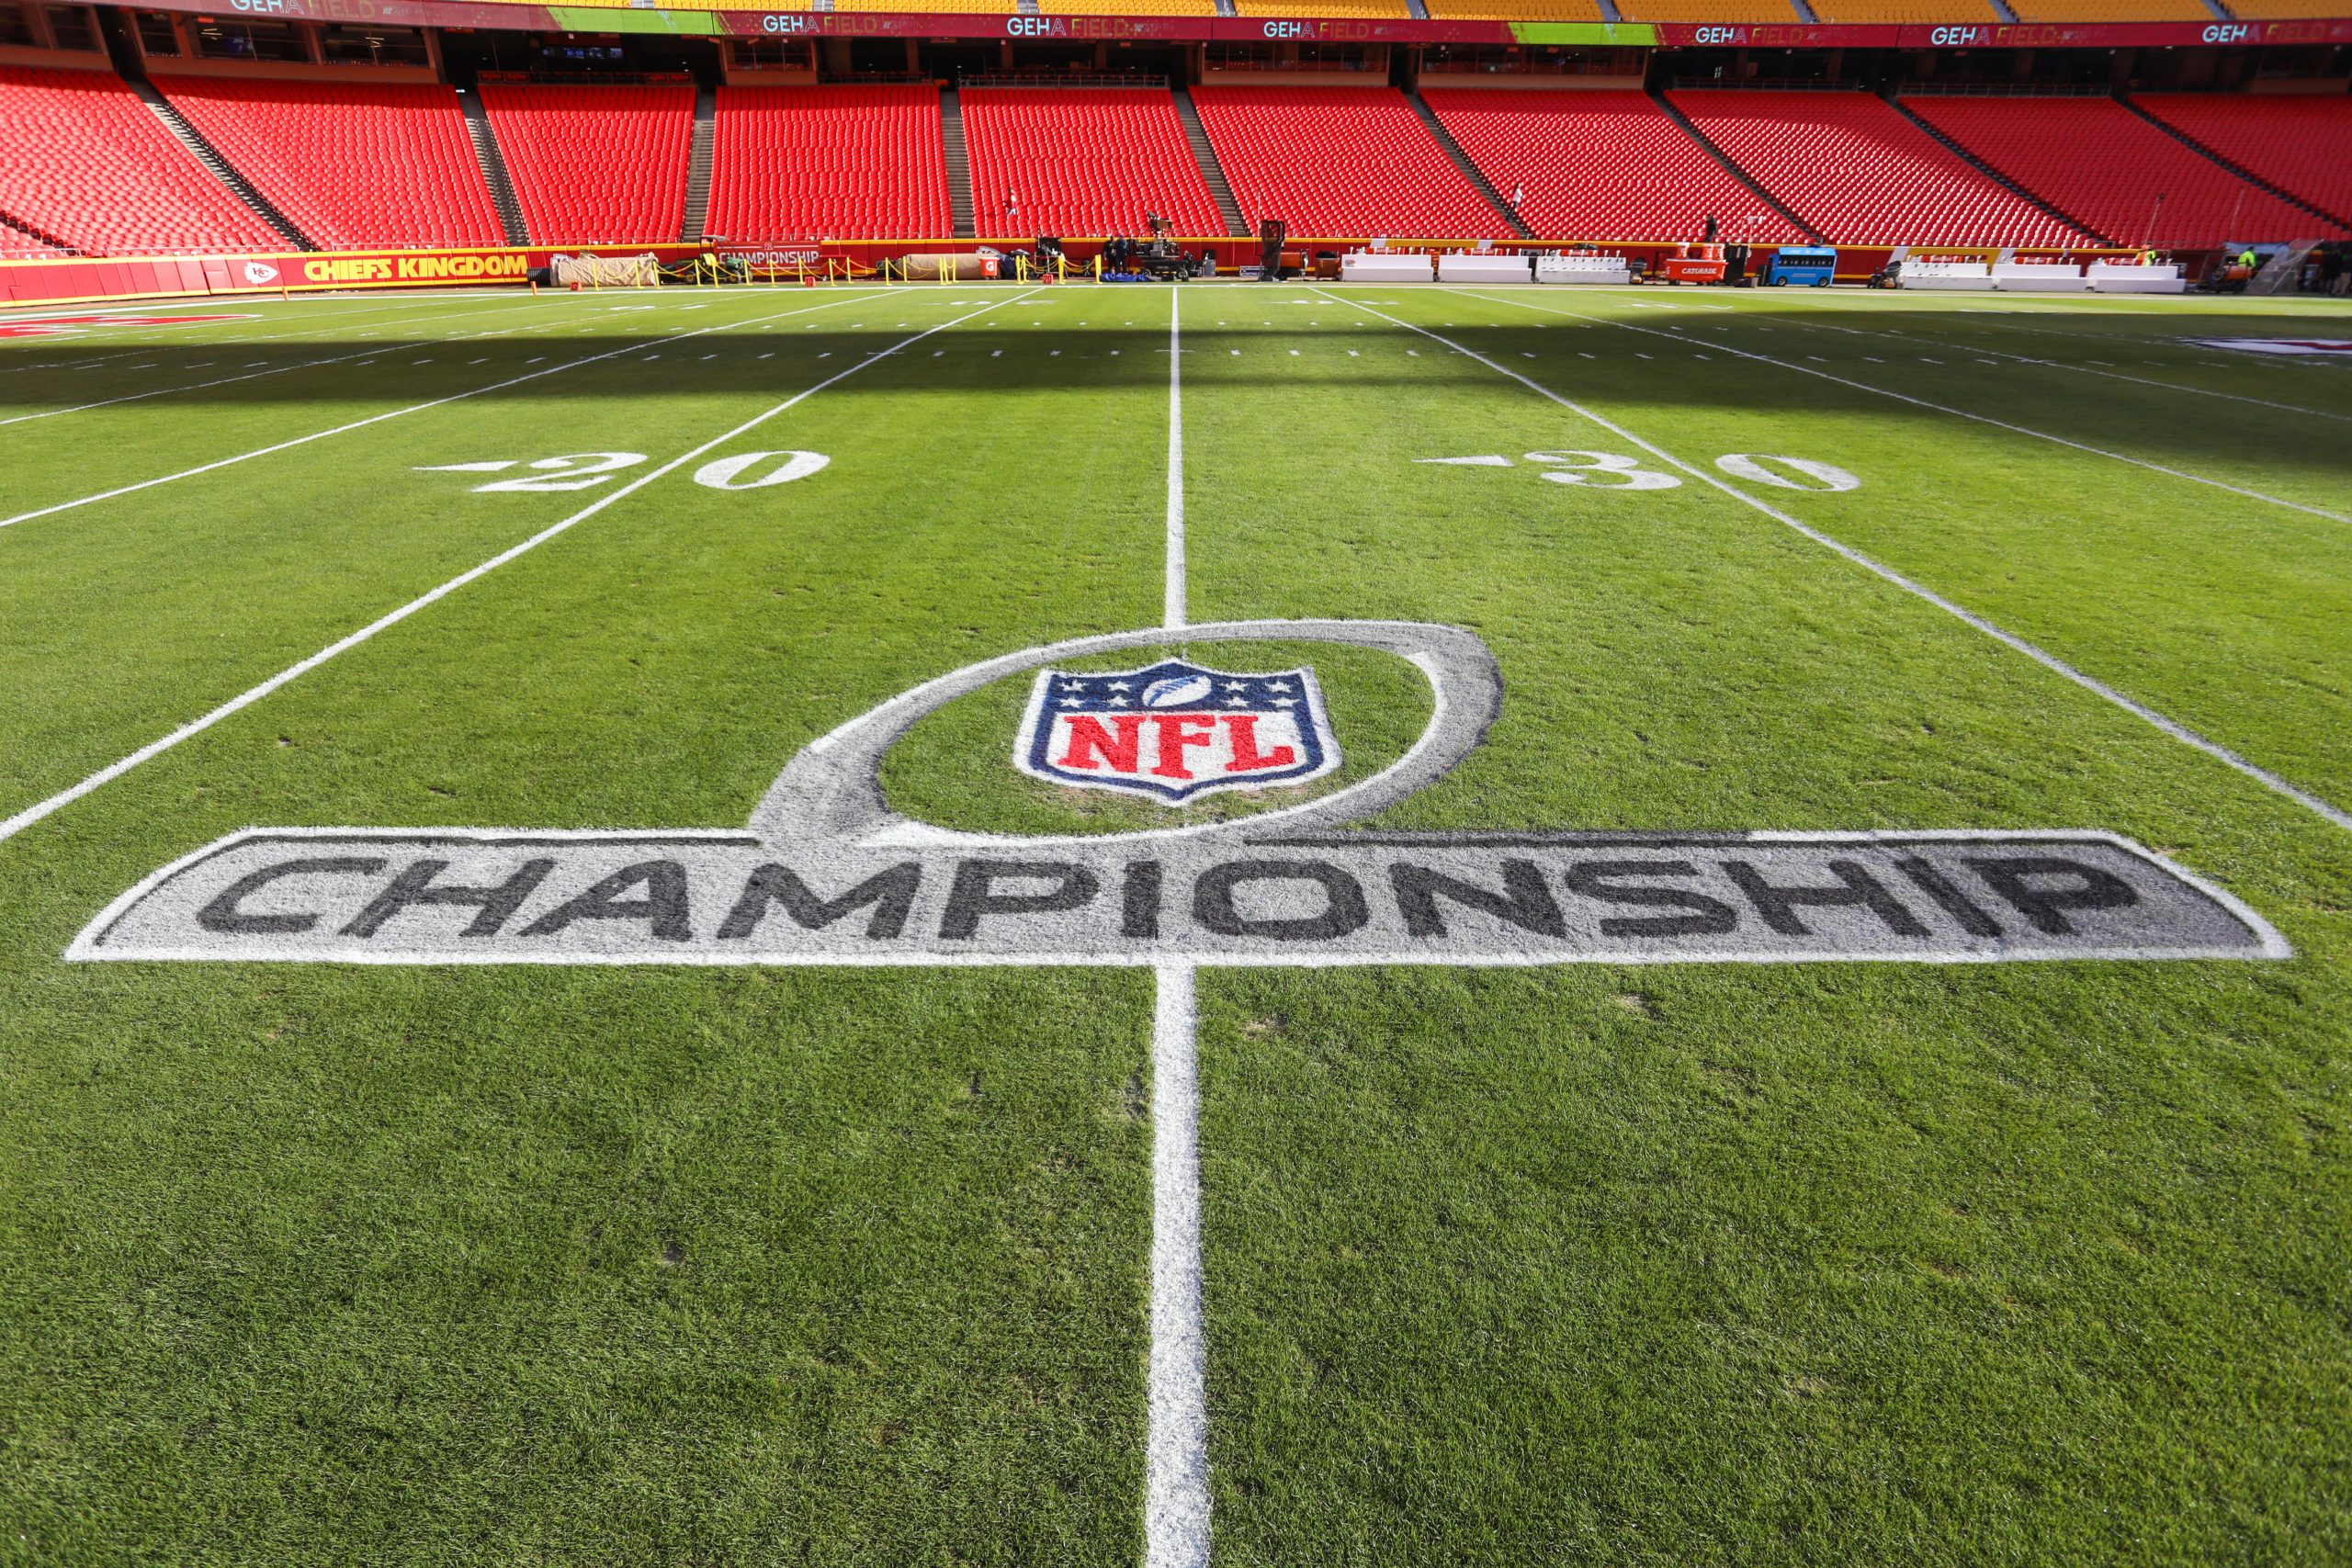 KANSAS CITY, MO - JANUARY 30: The NFL, American Football Herren, USA Championship logo on the field before the AFC Championship game between the Cincinnati Bengals and Kansas City Chiefs on Jan 30, 2022 at GEHA Field at Arrowhead Stadium in Kansas City, MO. Photo by Scott Winters/Icon Sportswire NFL: JAN 30 AFC Conference Championship - Bengals at Chiefs Icon2201300100